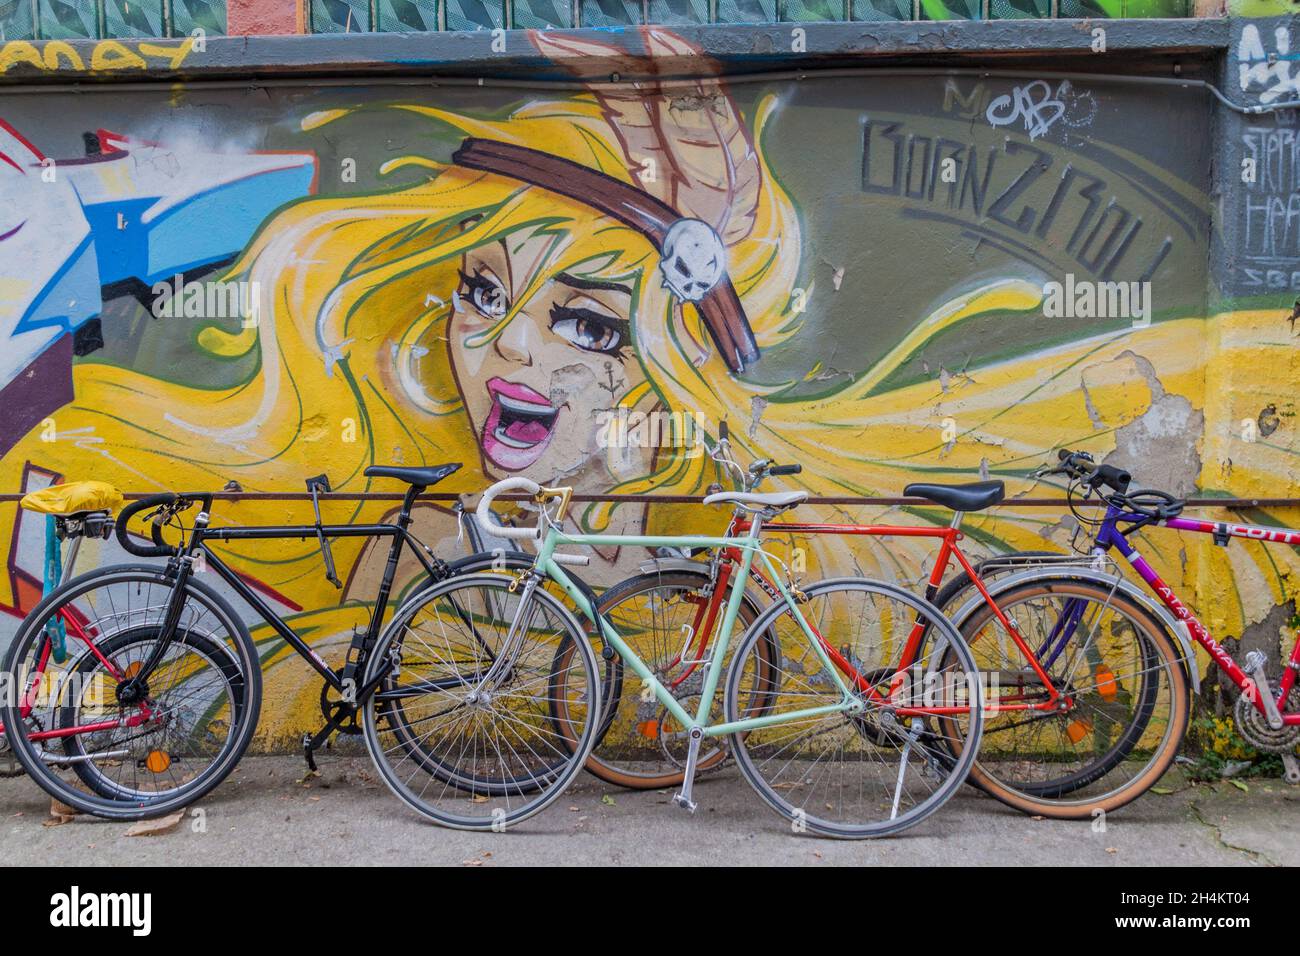 BERLIN, GERMANY - SEPTEMBER 1, 2017: Street art and bicycles in RAW Gelande subcultural compound in Berlin. Stock Photo